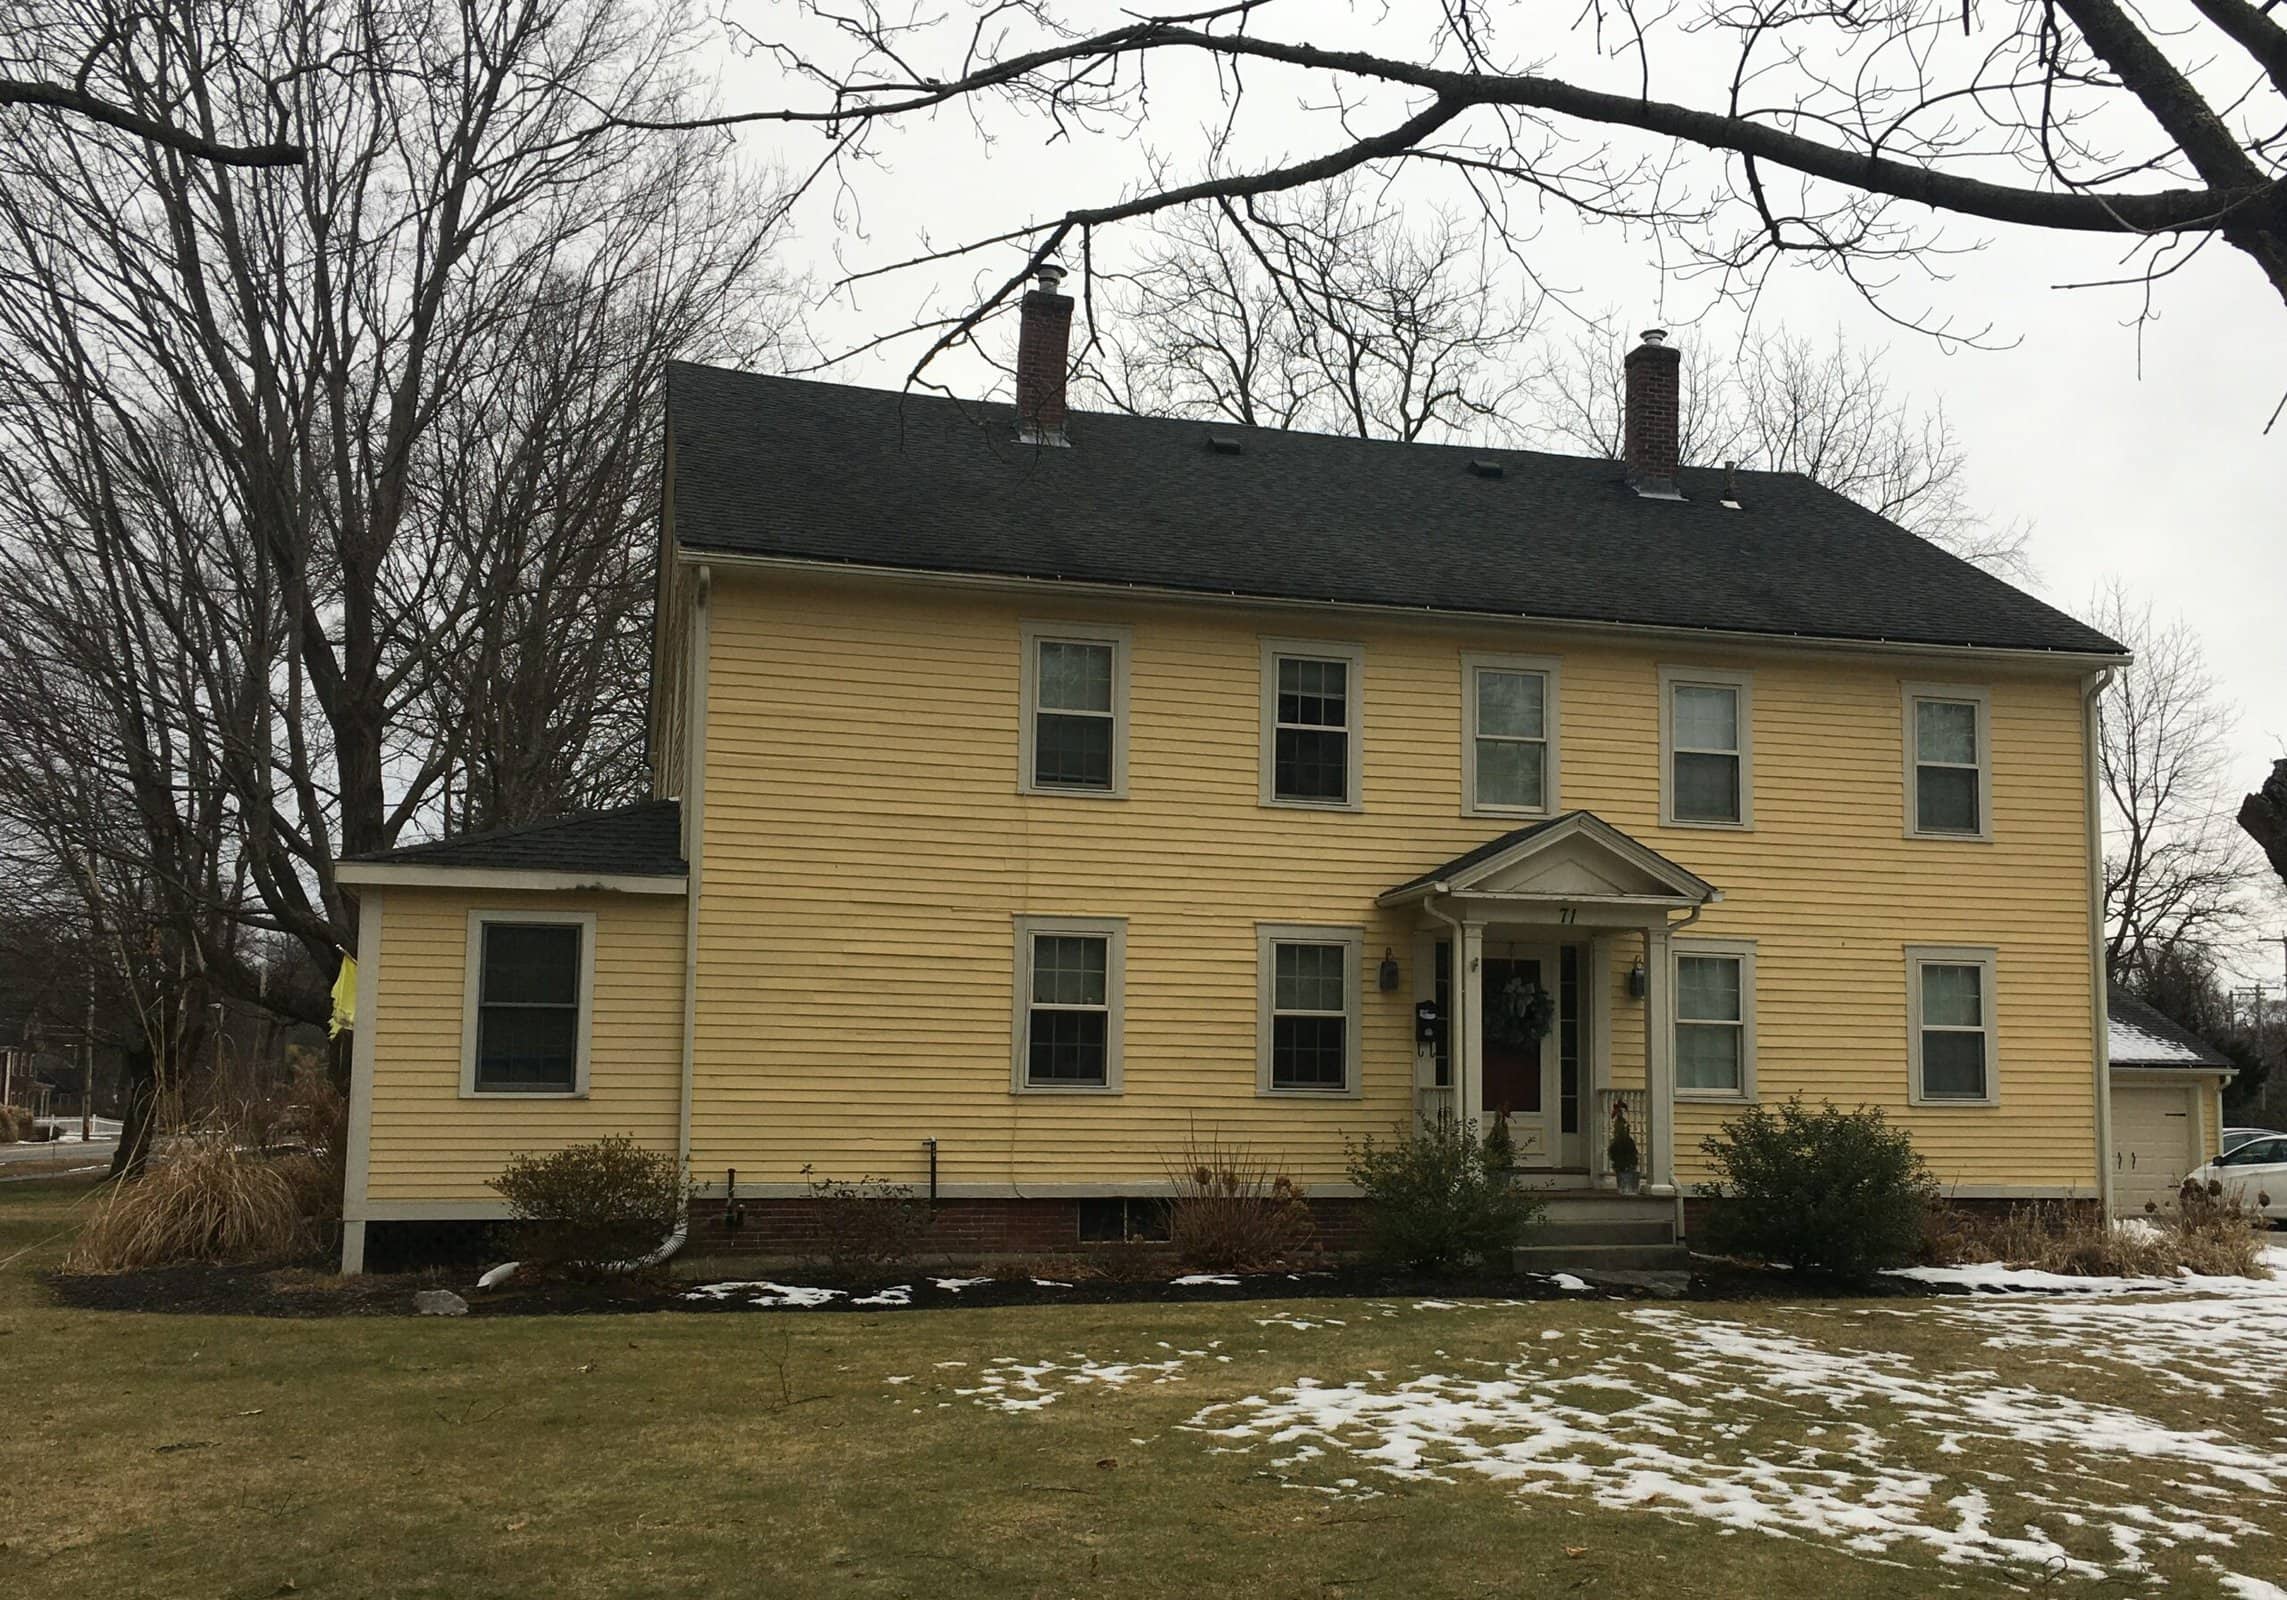 Northborough’s Evangelical Congregational Meeting House is now a private home